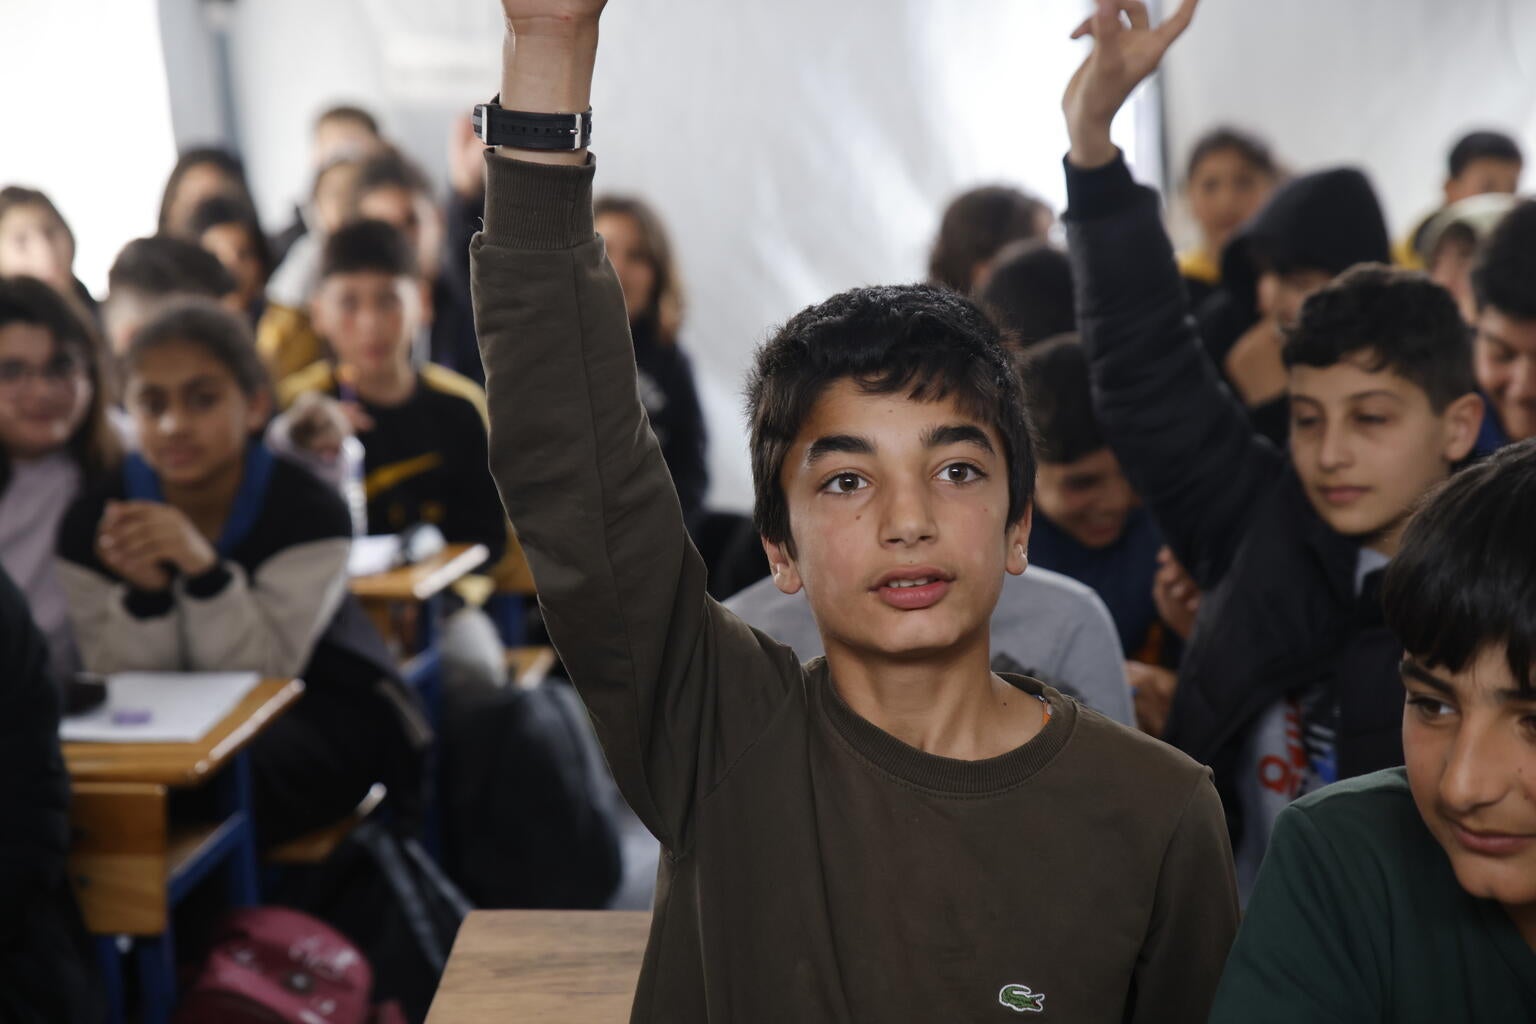 Children attend school in a UNICEF-supported classroom at a temporary shelter in Türkiye.